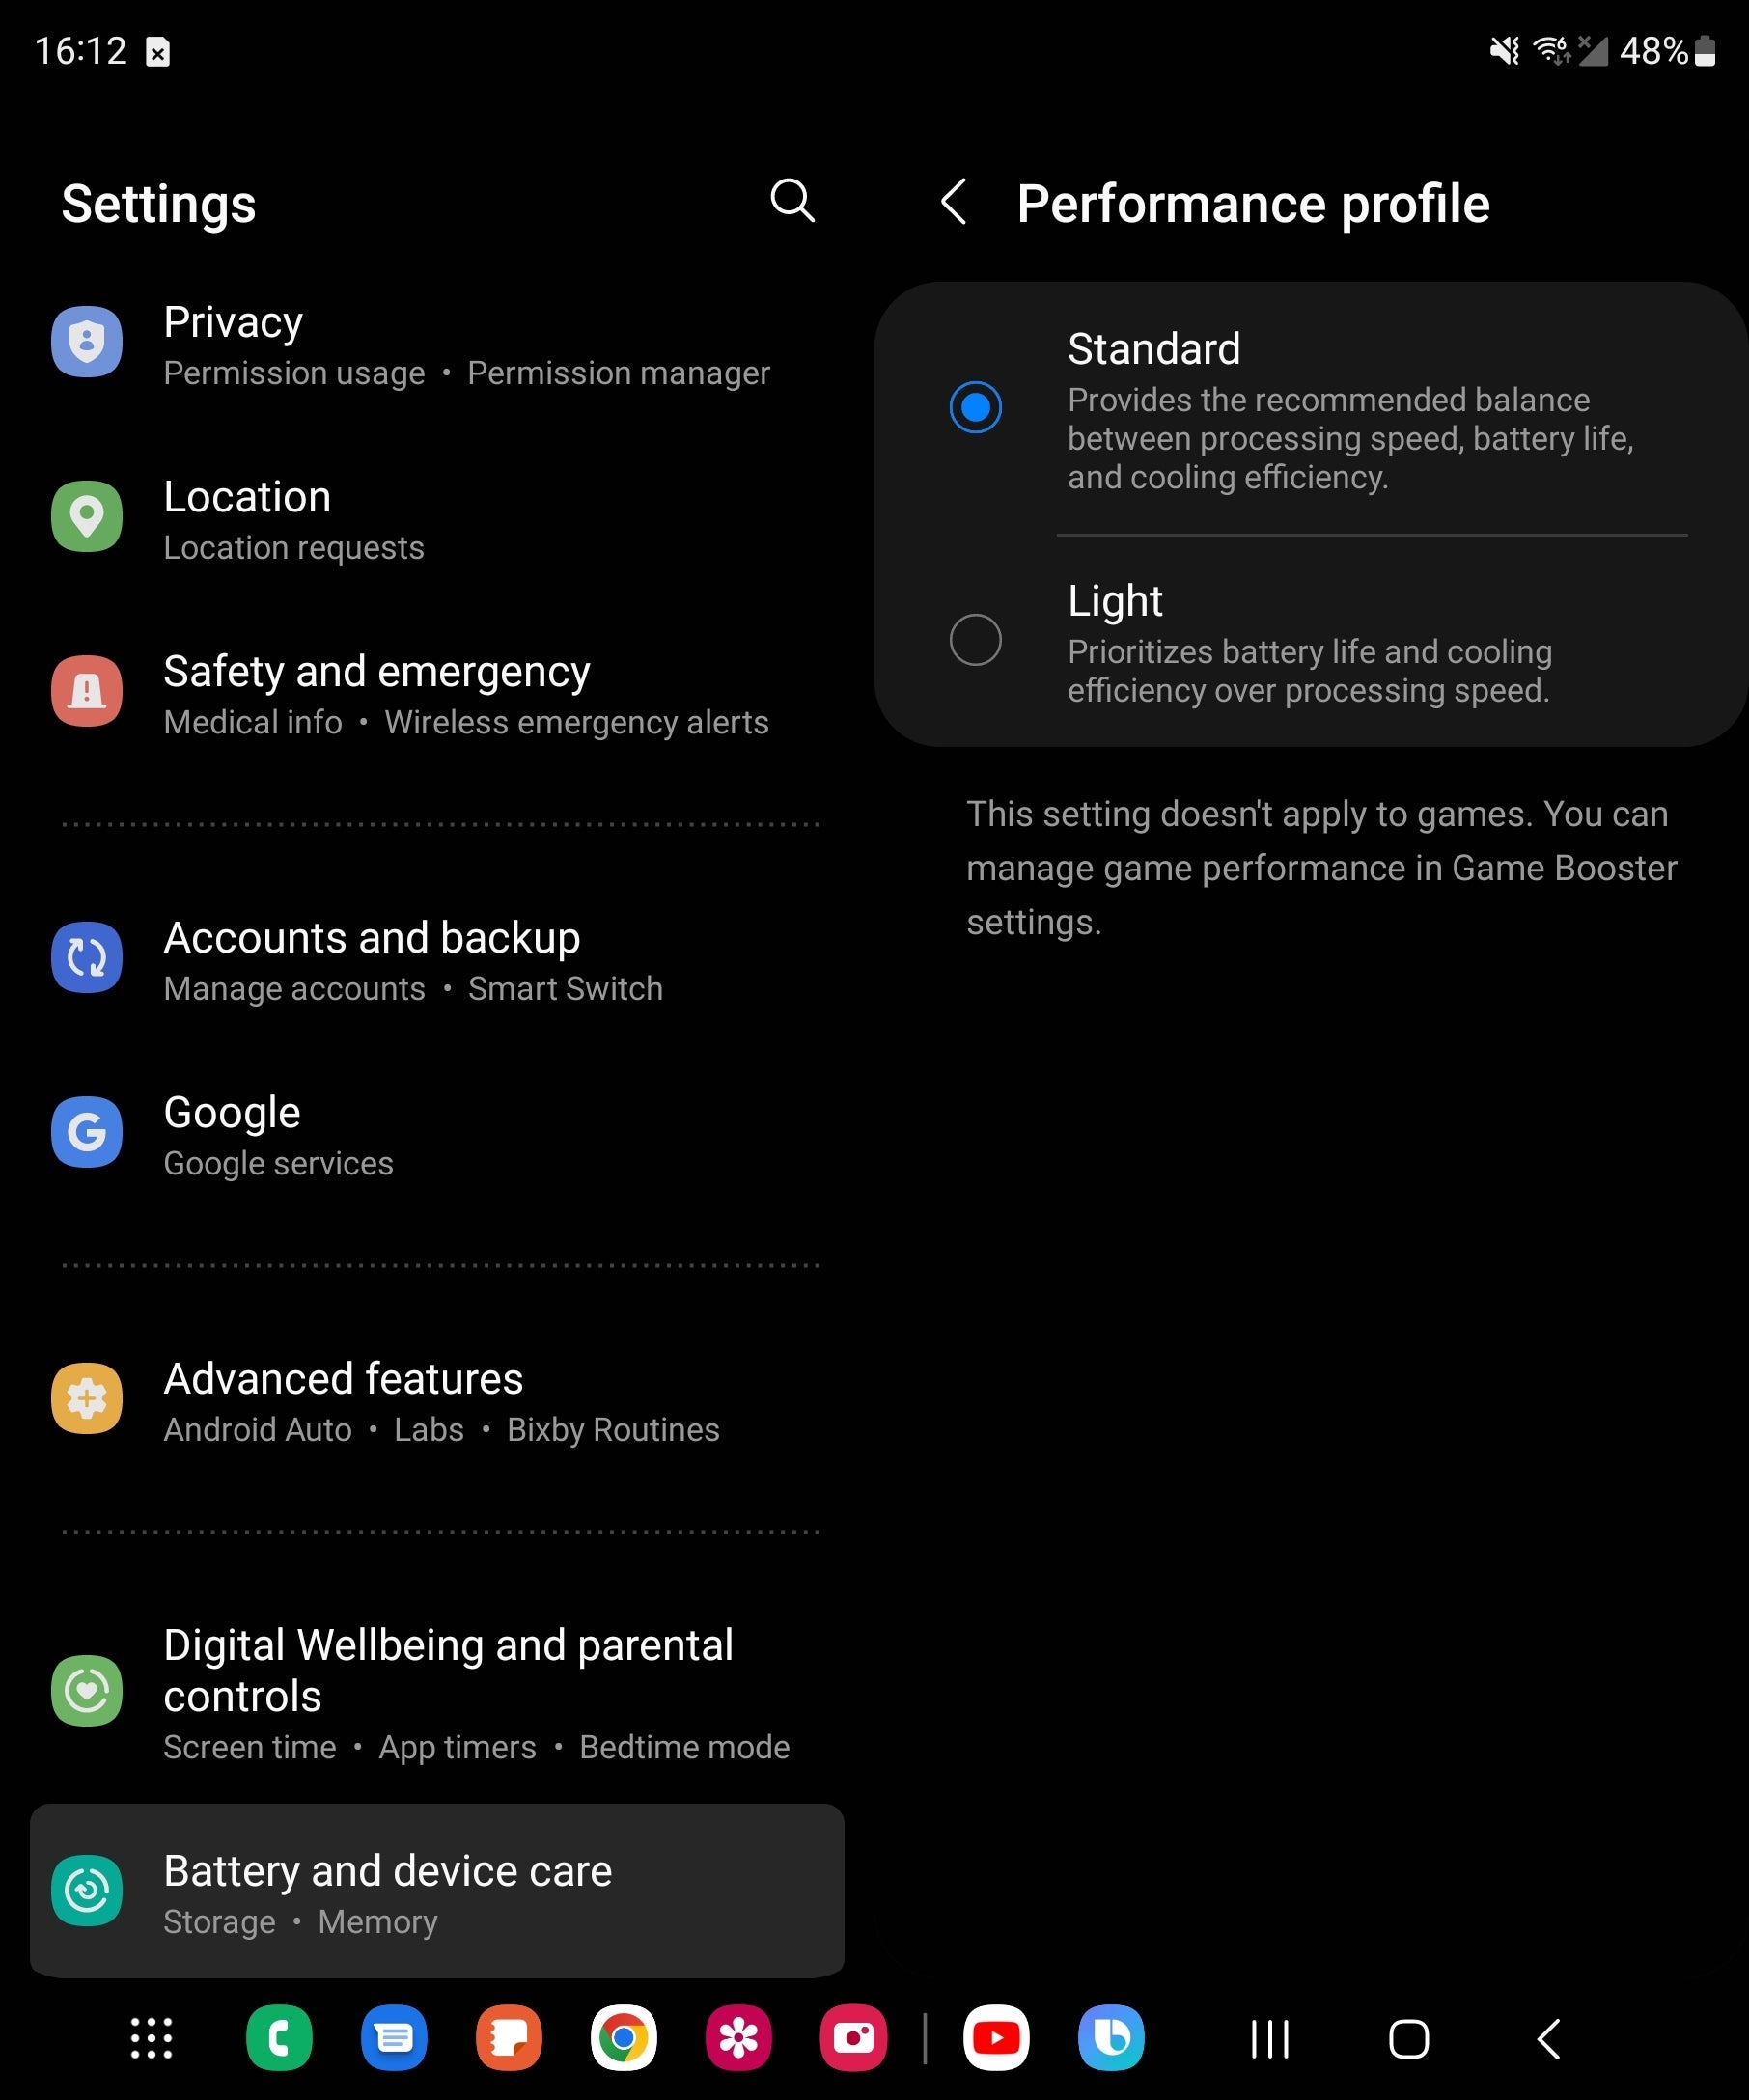 The new Z Fold 4 performance profile - Samsung&#039;s new Galaxy Z Fold 4 &#039;Light&#039; performance profile boosts battery life